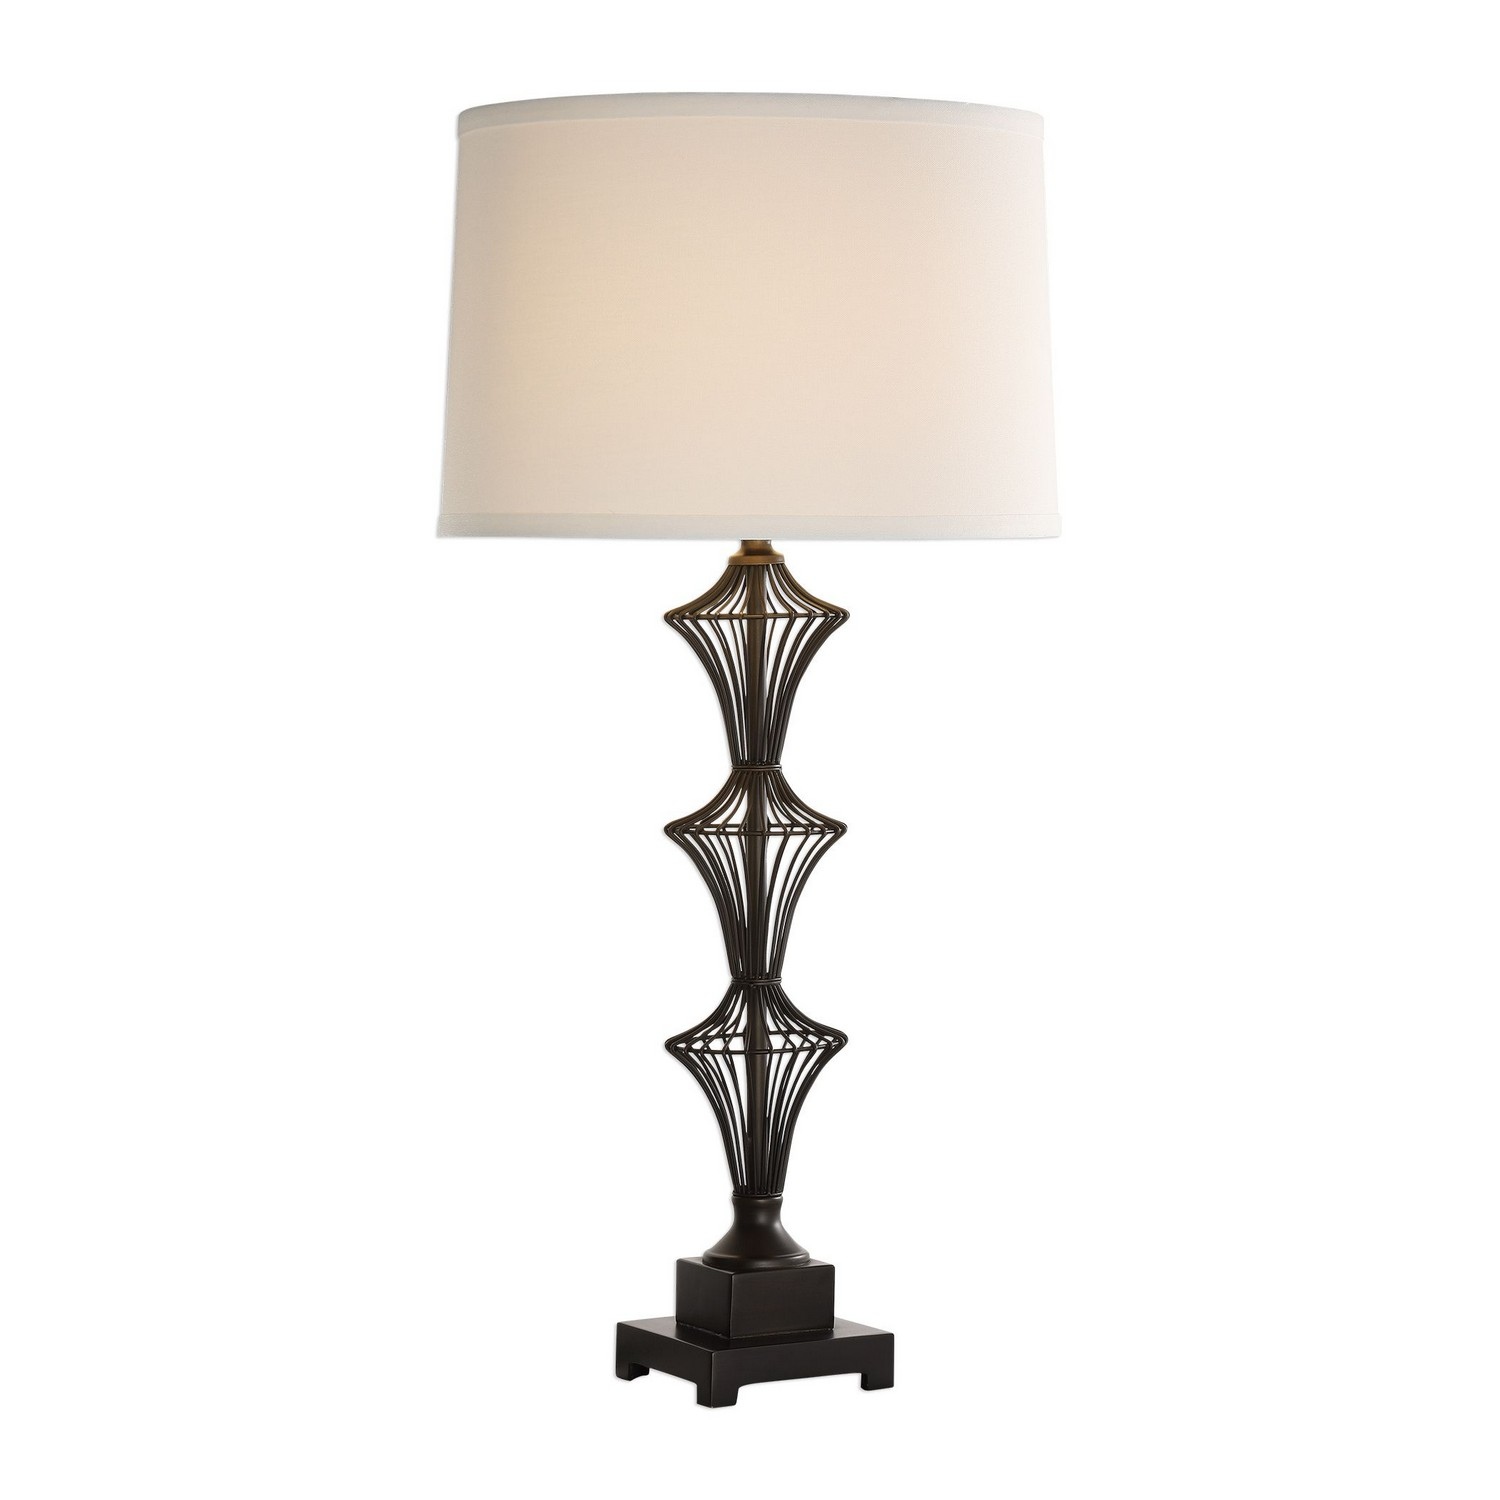 Uttermost W26010-1 Table Lamp - Aged Black